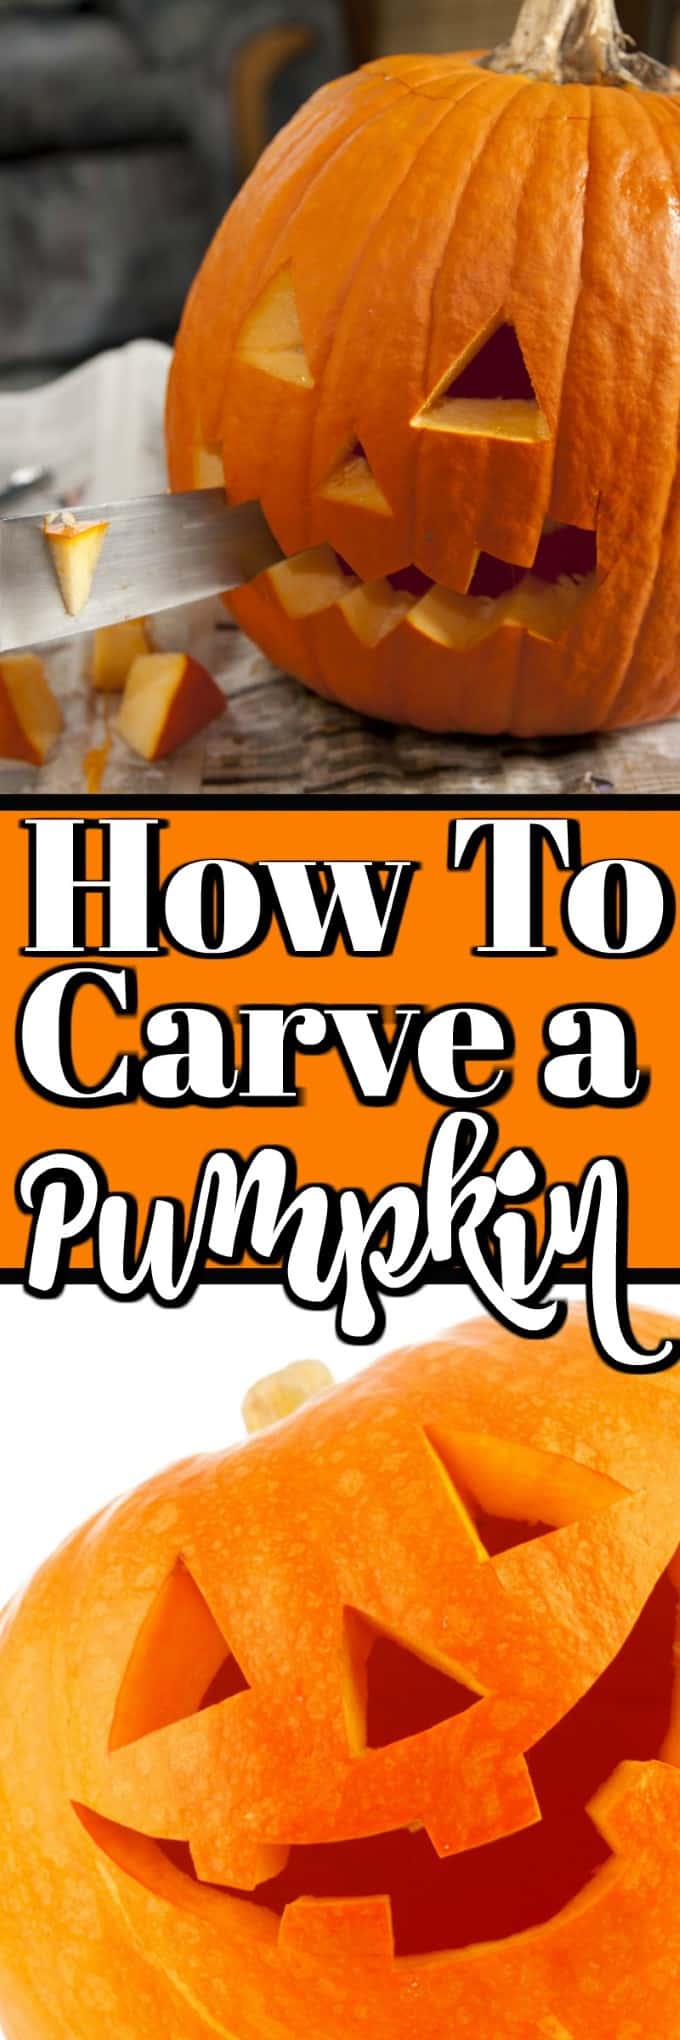 How to Carve a Pumpkin will help you with great tips and tricks that you may not have thought of!! #pumpkin #carving #Halloween